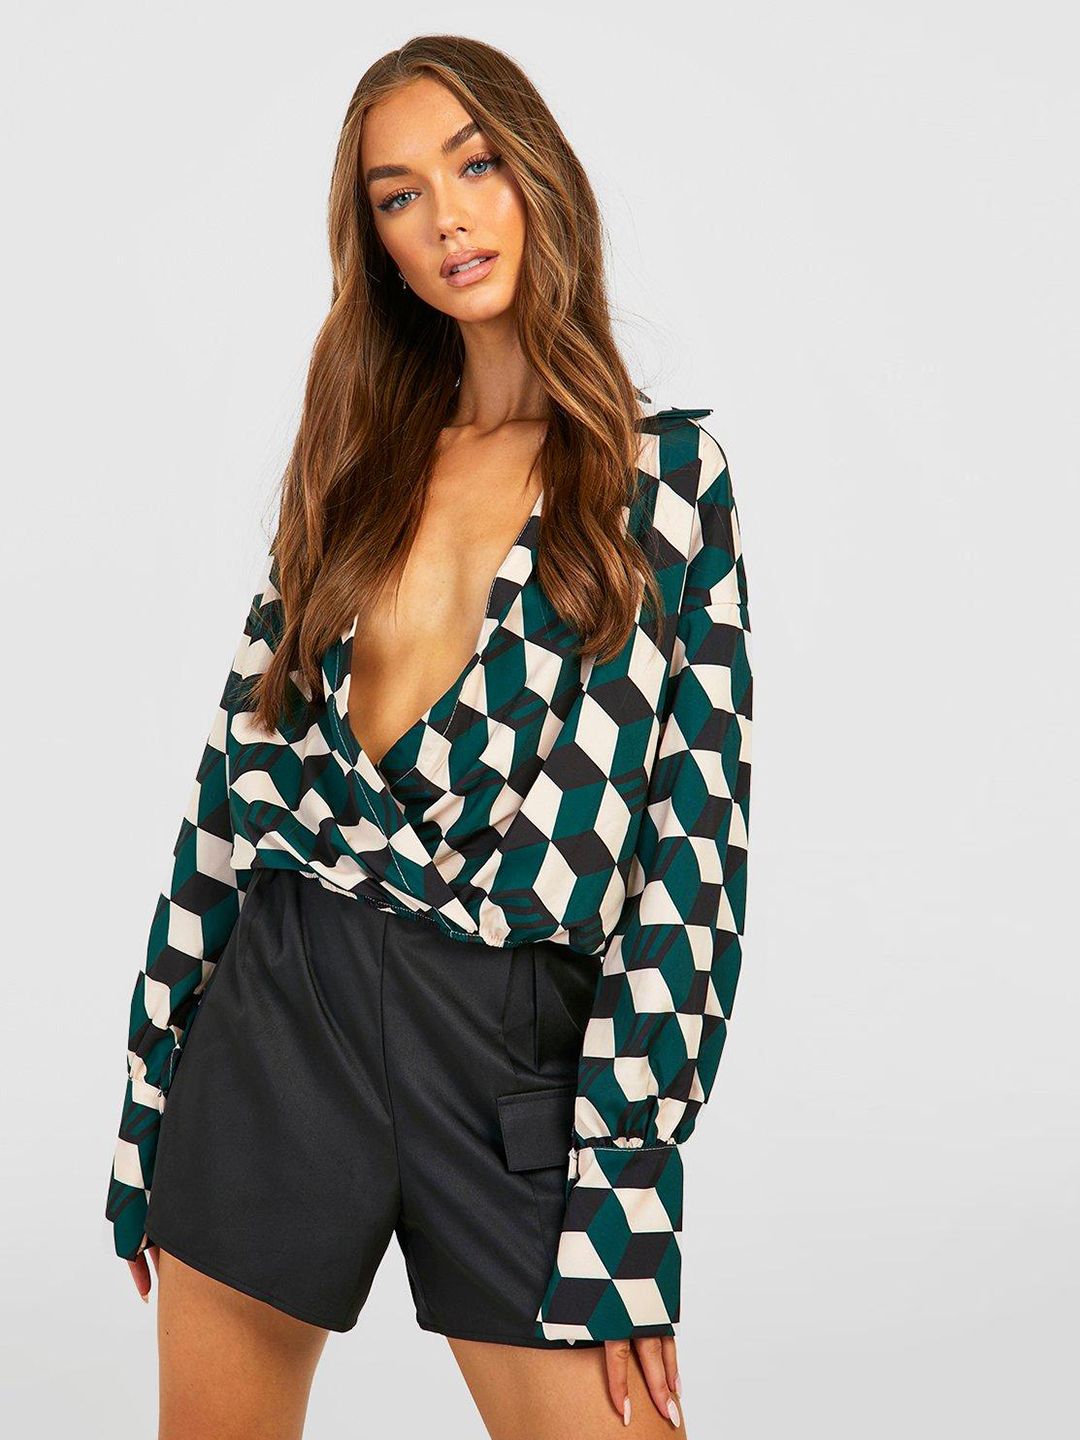 Boohoo Green & Off White Geometric Print Extended Sleeves Wrap Top Price in India